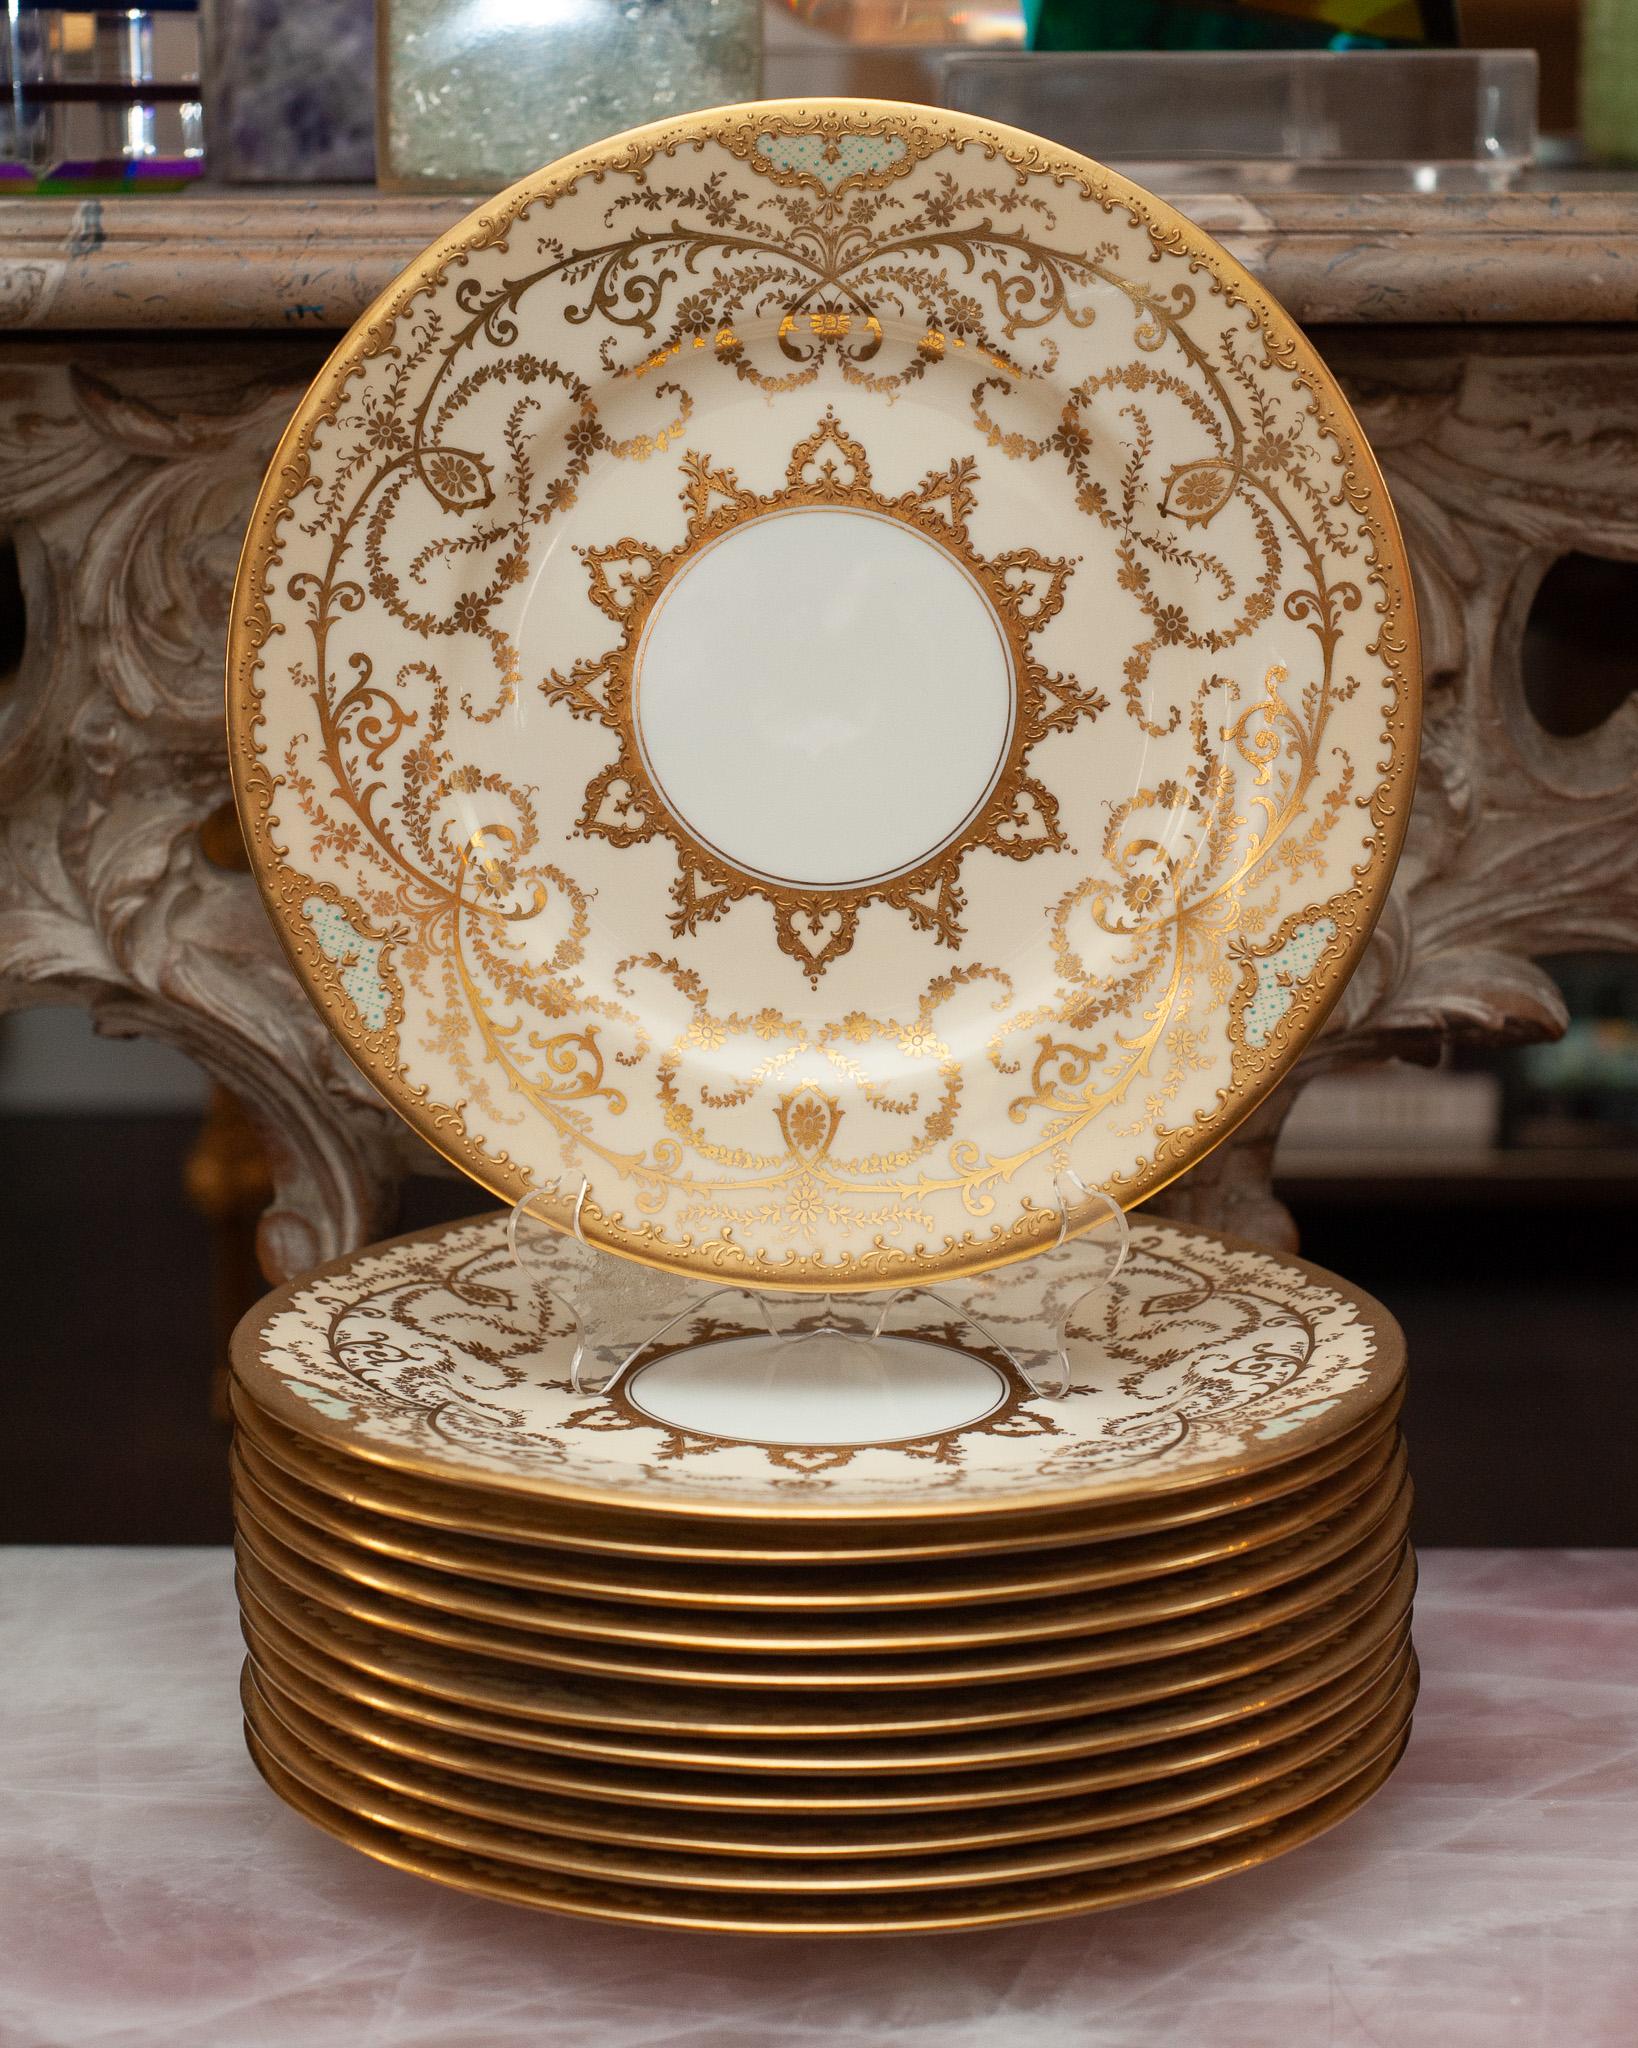 A beautiful set of 12 antique Coalport gold and cream dishes made for Ellis Brothers, Toronto. An ornate and impressive dinner plate set to uplift any table. 